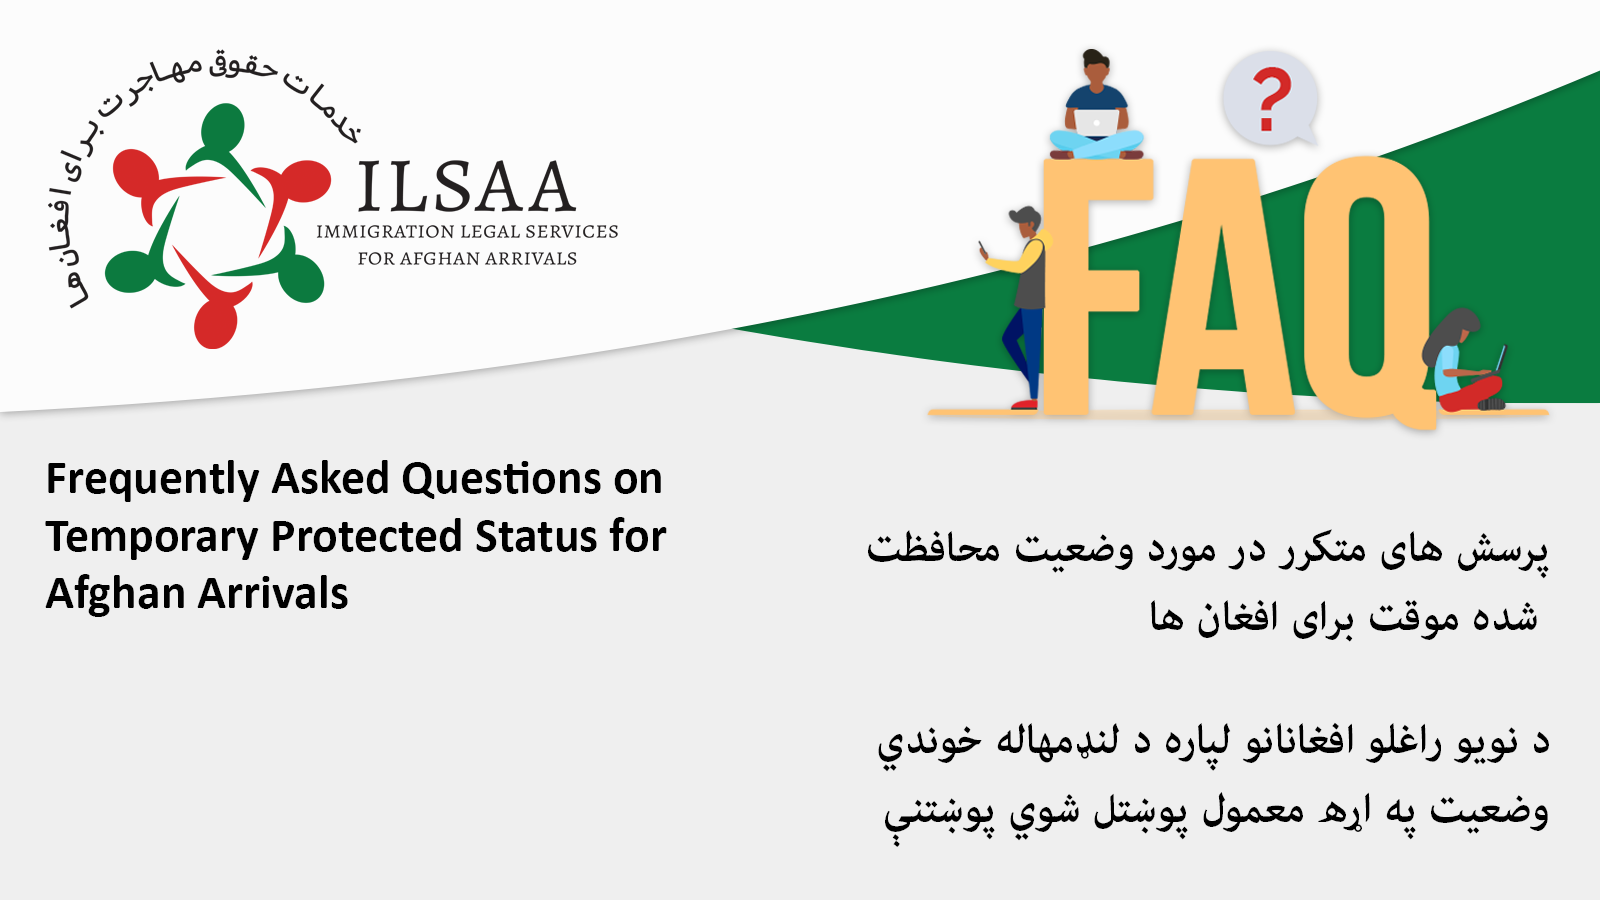 he letters FAQ in yellow with three people sitting around the letters and a grey comment bubble with a red question mark inside. Background is white, grey, and green with ILSAA logo, Immigration Legal Services for Afghan Arrivals, in top-left corner. Text: Frequently Asked Questions on Temporary Protected Status for Afghans